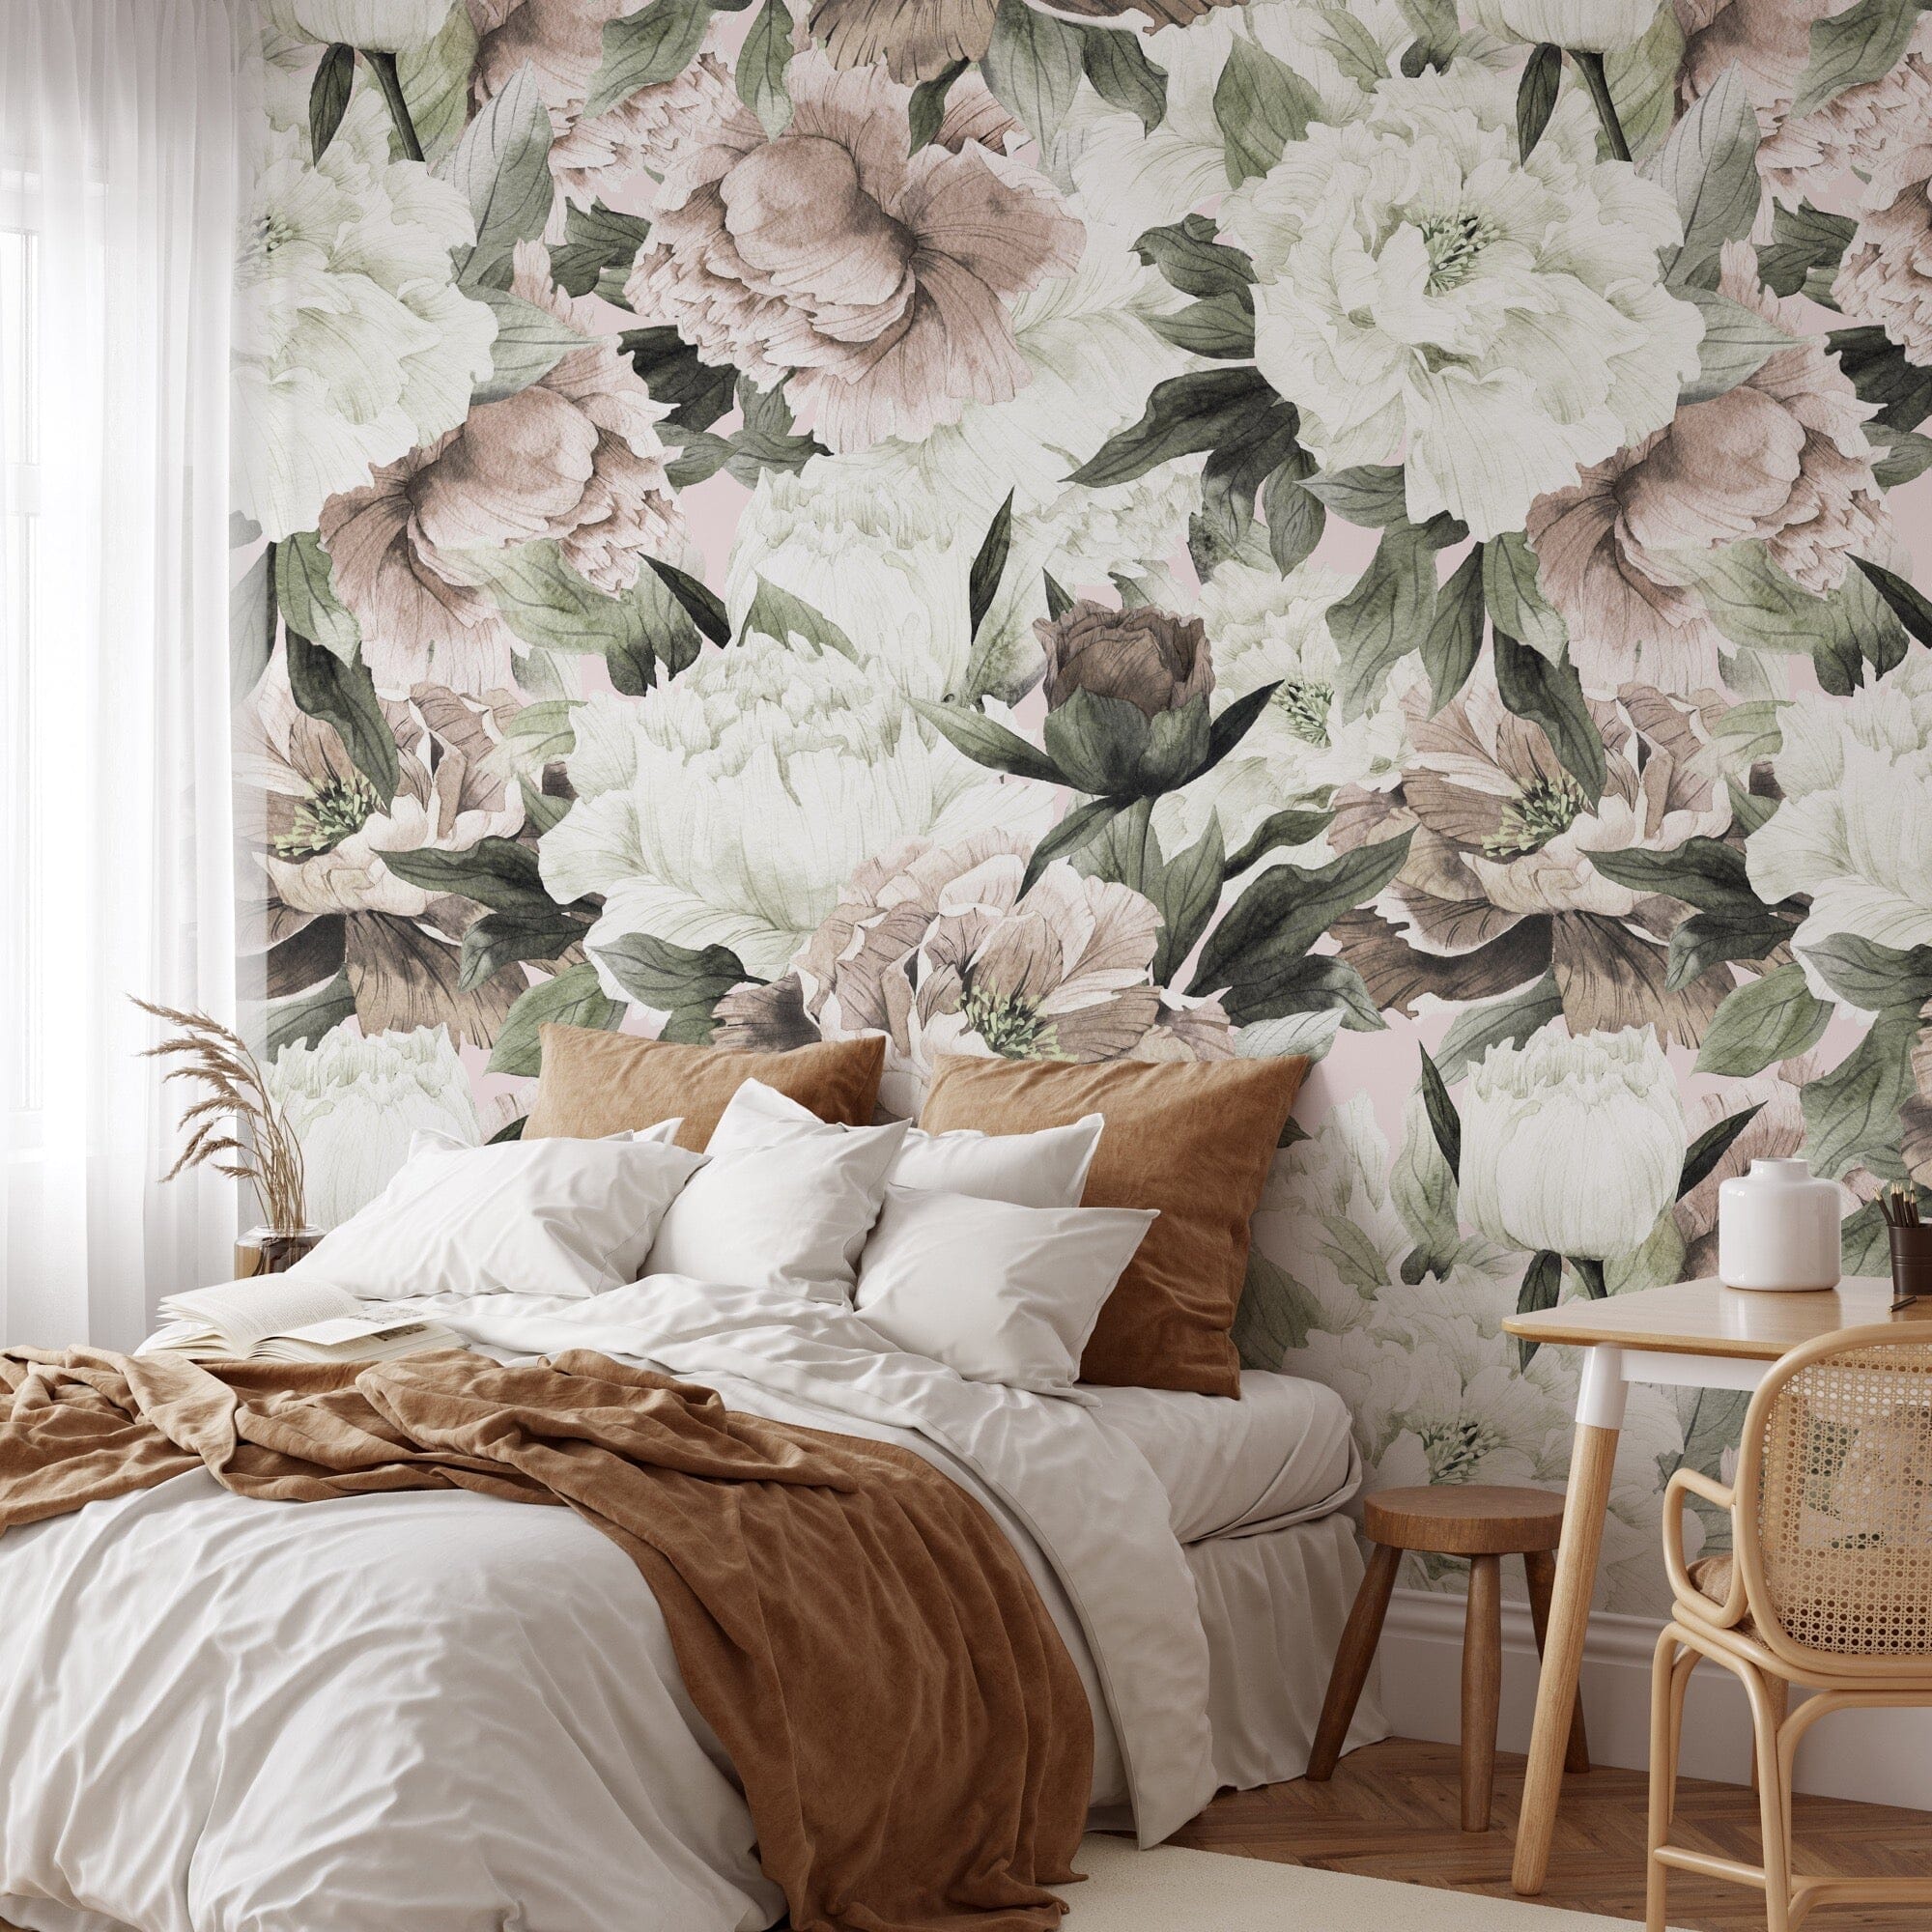 House of Hampton Peonies Removable Wallpaper  24undefinedundefined inch x  10undefinedft  Overstock  31602400